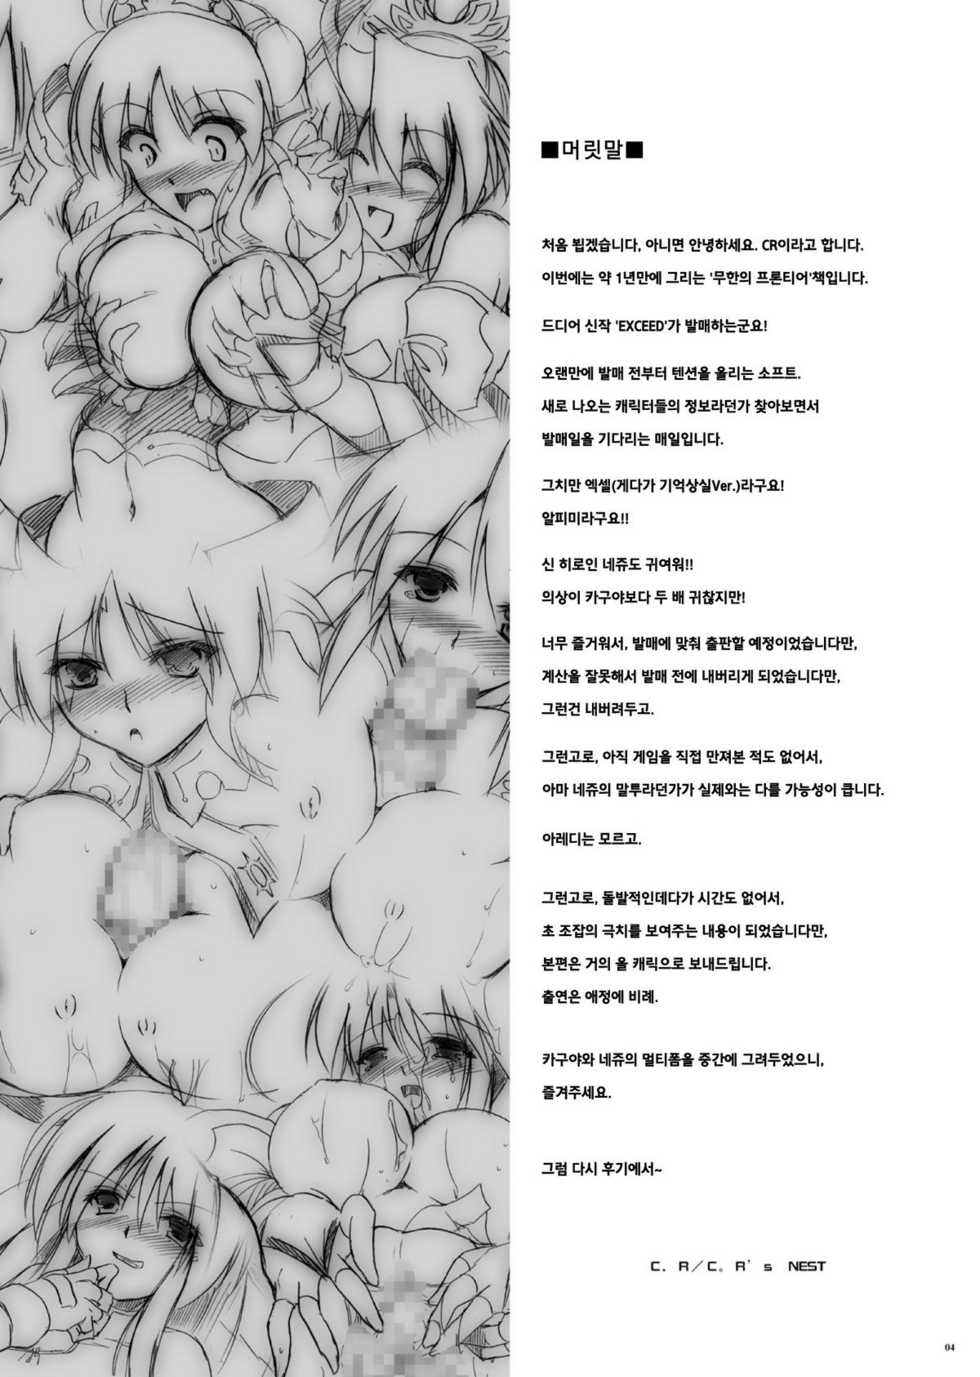 [C.R`s NEST] EXCEED CHARGE!! (Super Robot Wars) (korean) - Page 4